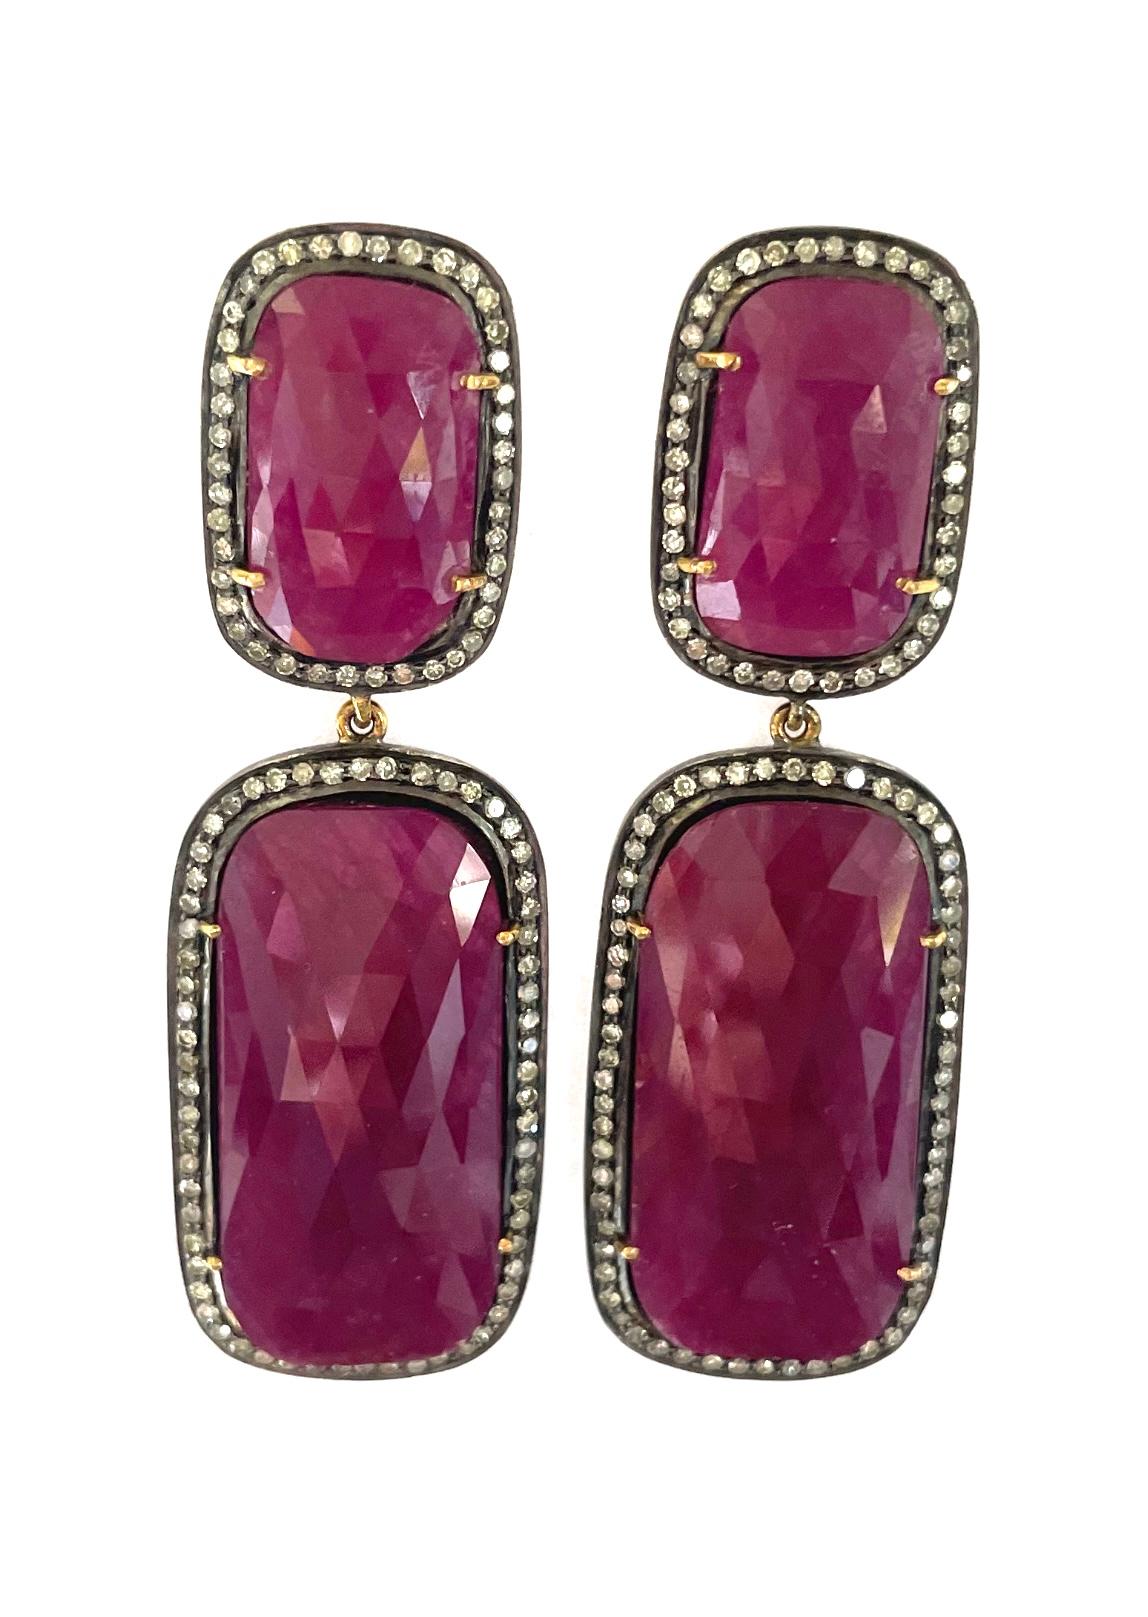 Description
Dramatic 70 carats Ruby 2-tier earrings, framed with 1.80 carats pave diamonds.
Item # E3214
Check out matching necklace and bracelet, see last photo.
Necklace title: “65 Carats Ruby and Pave Diamonds Centerpiece Accents Necklace”, item#